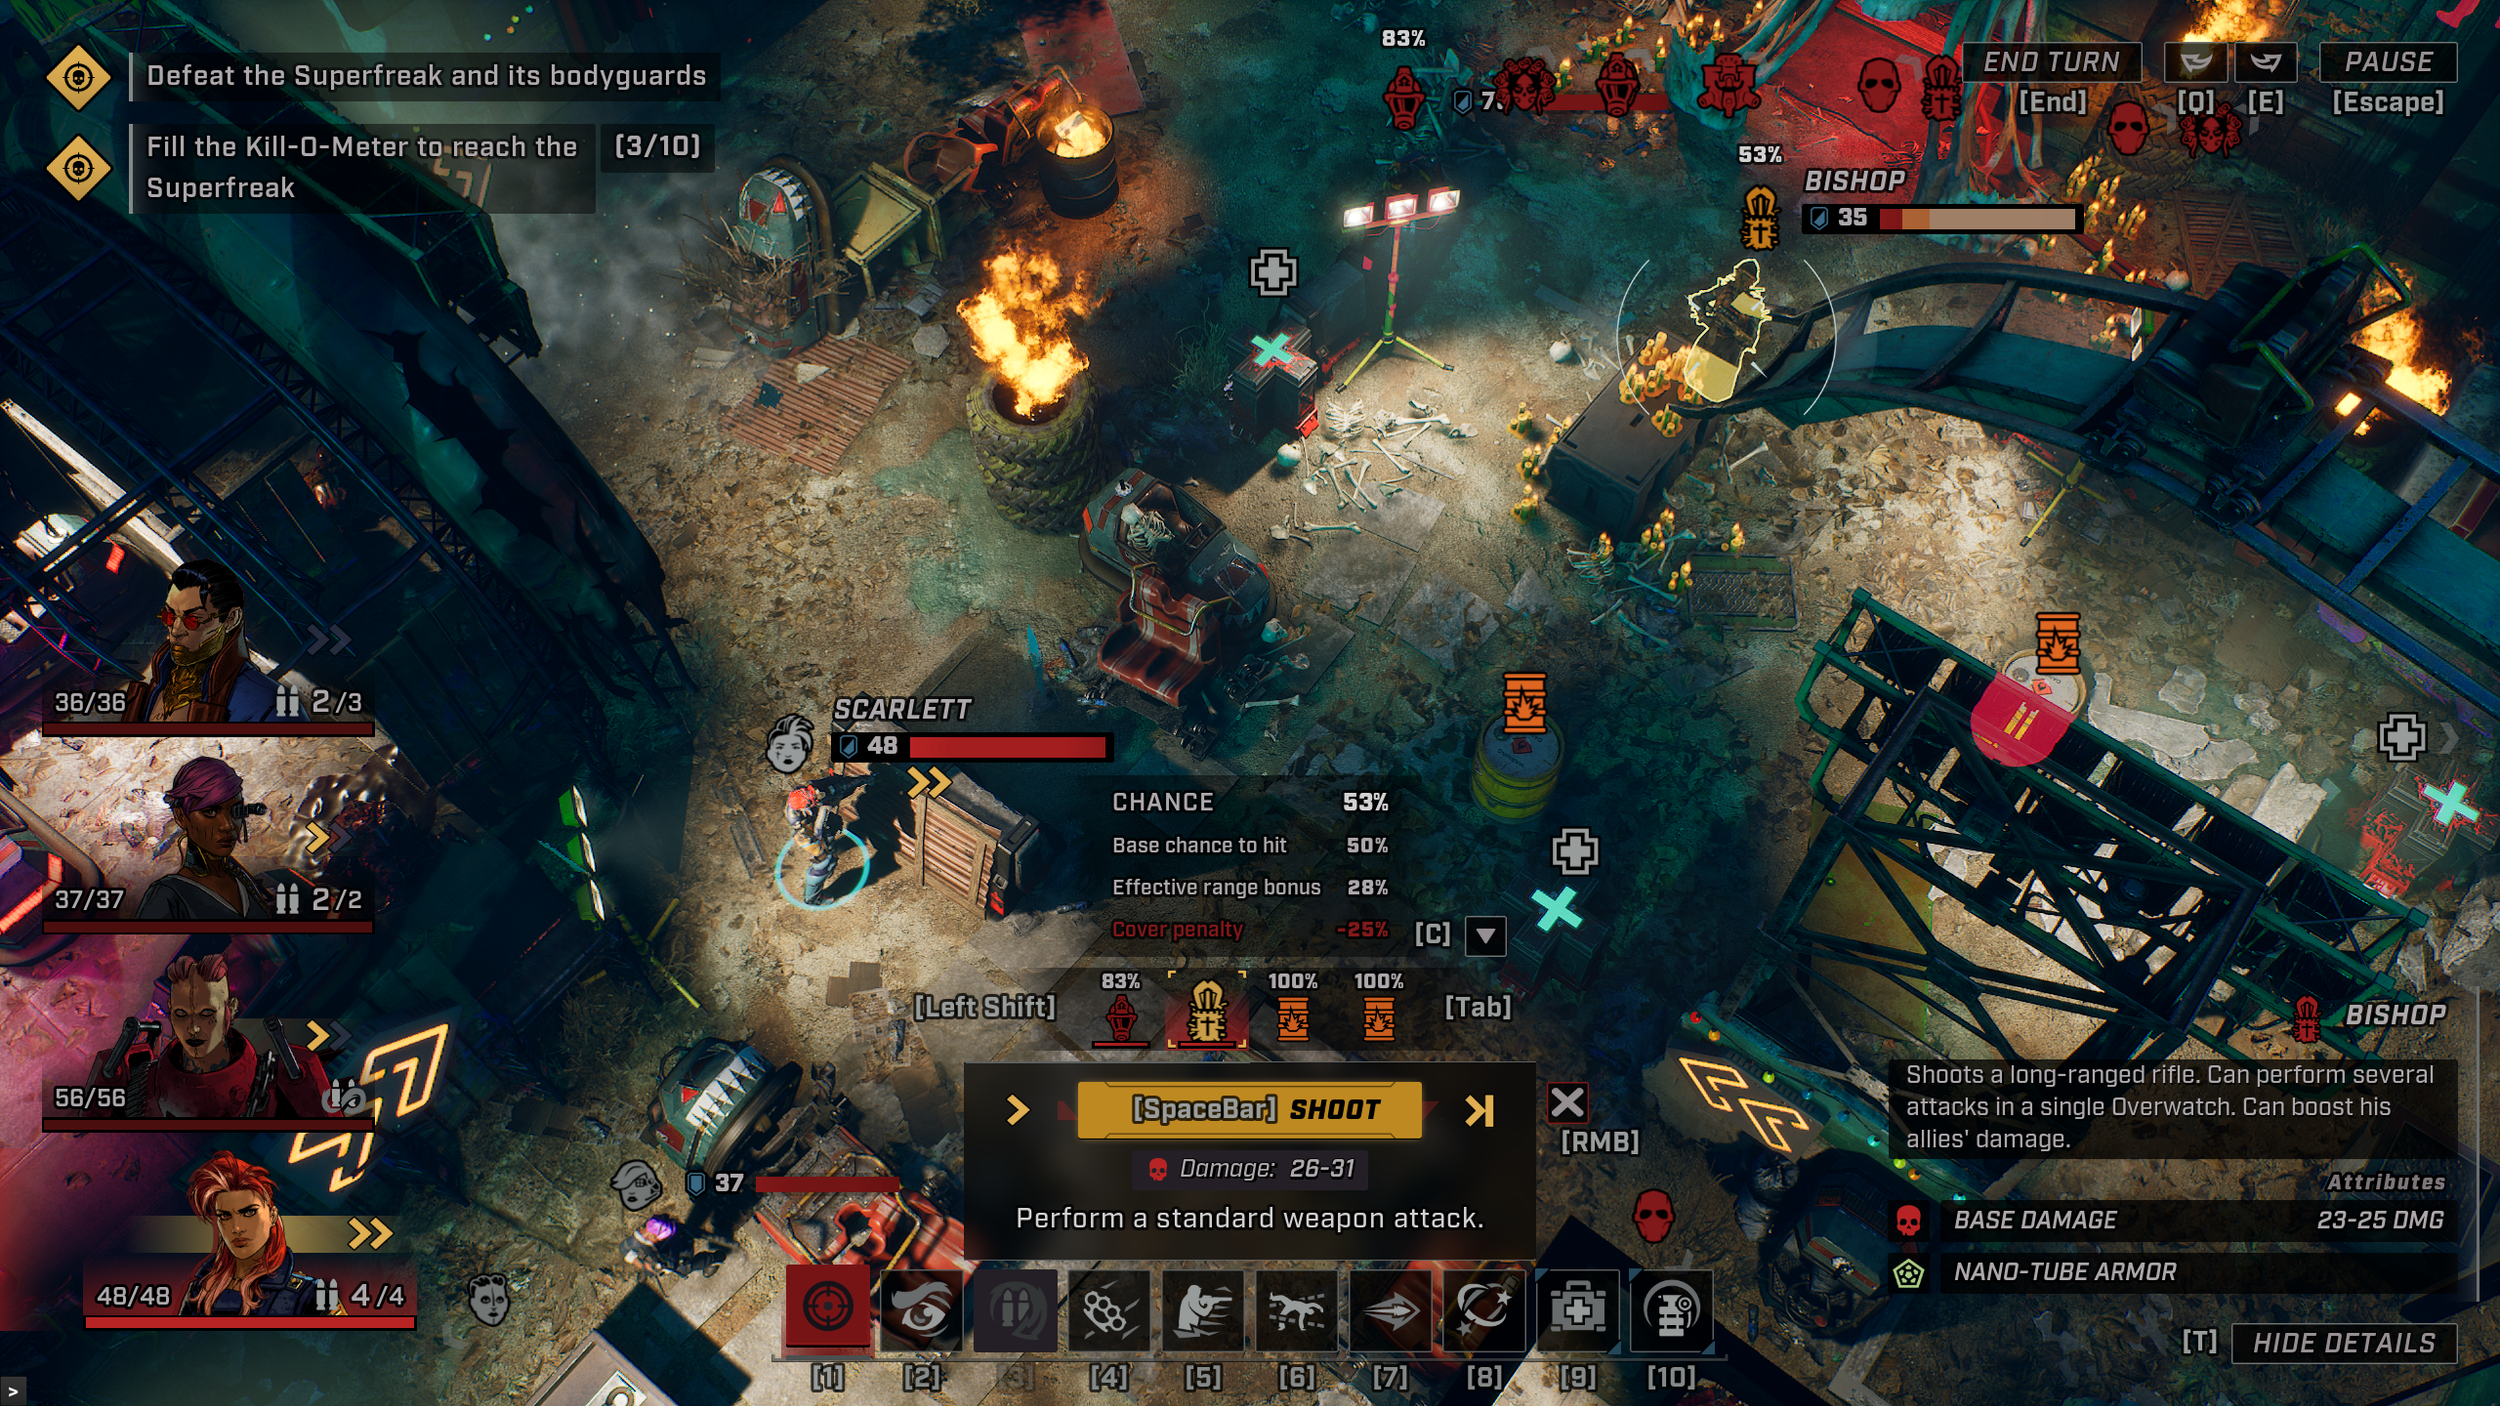 Redfall has been given new life as a massive update has released for the  game — Maxi-Geek